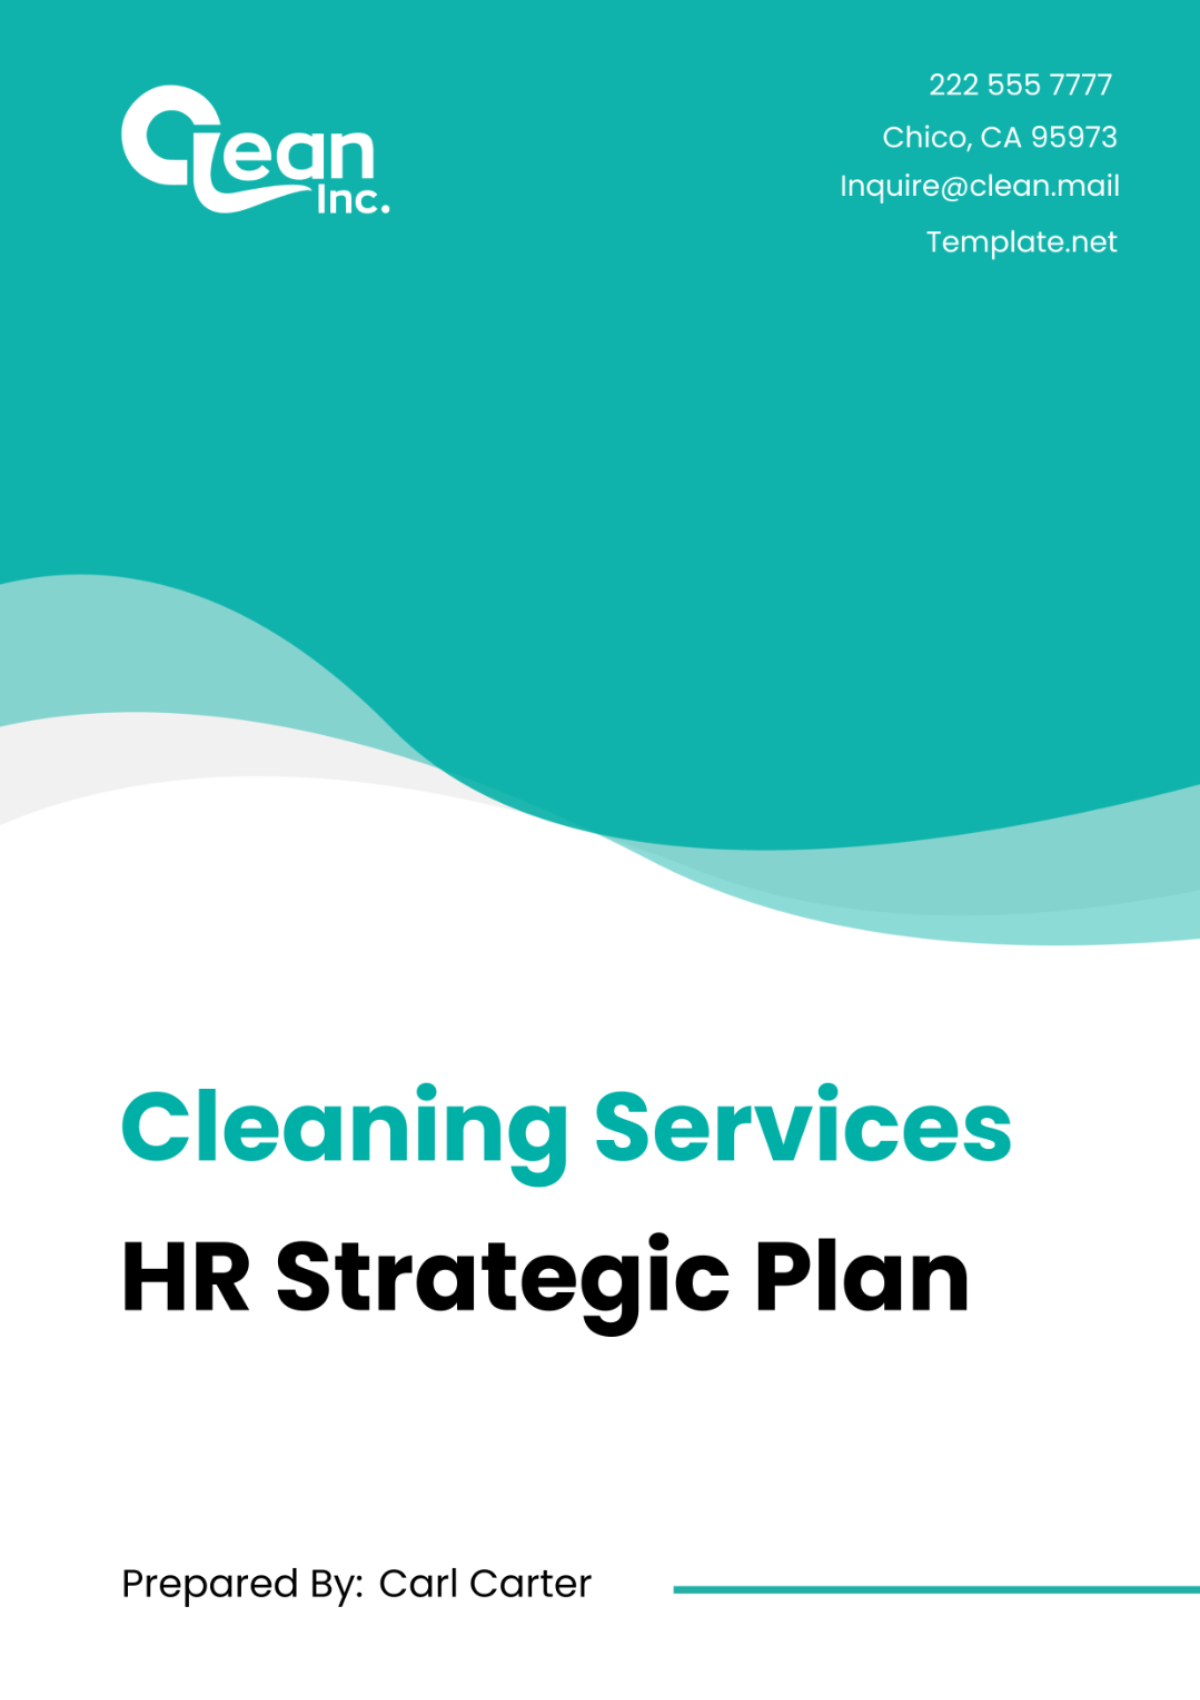 Cleaning Services HR Strategic Plan Template